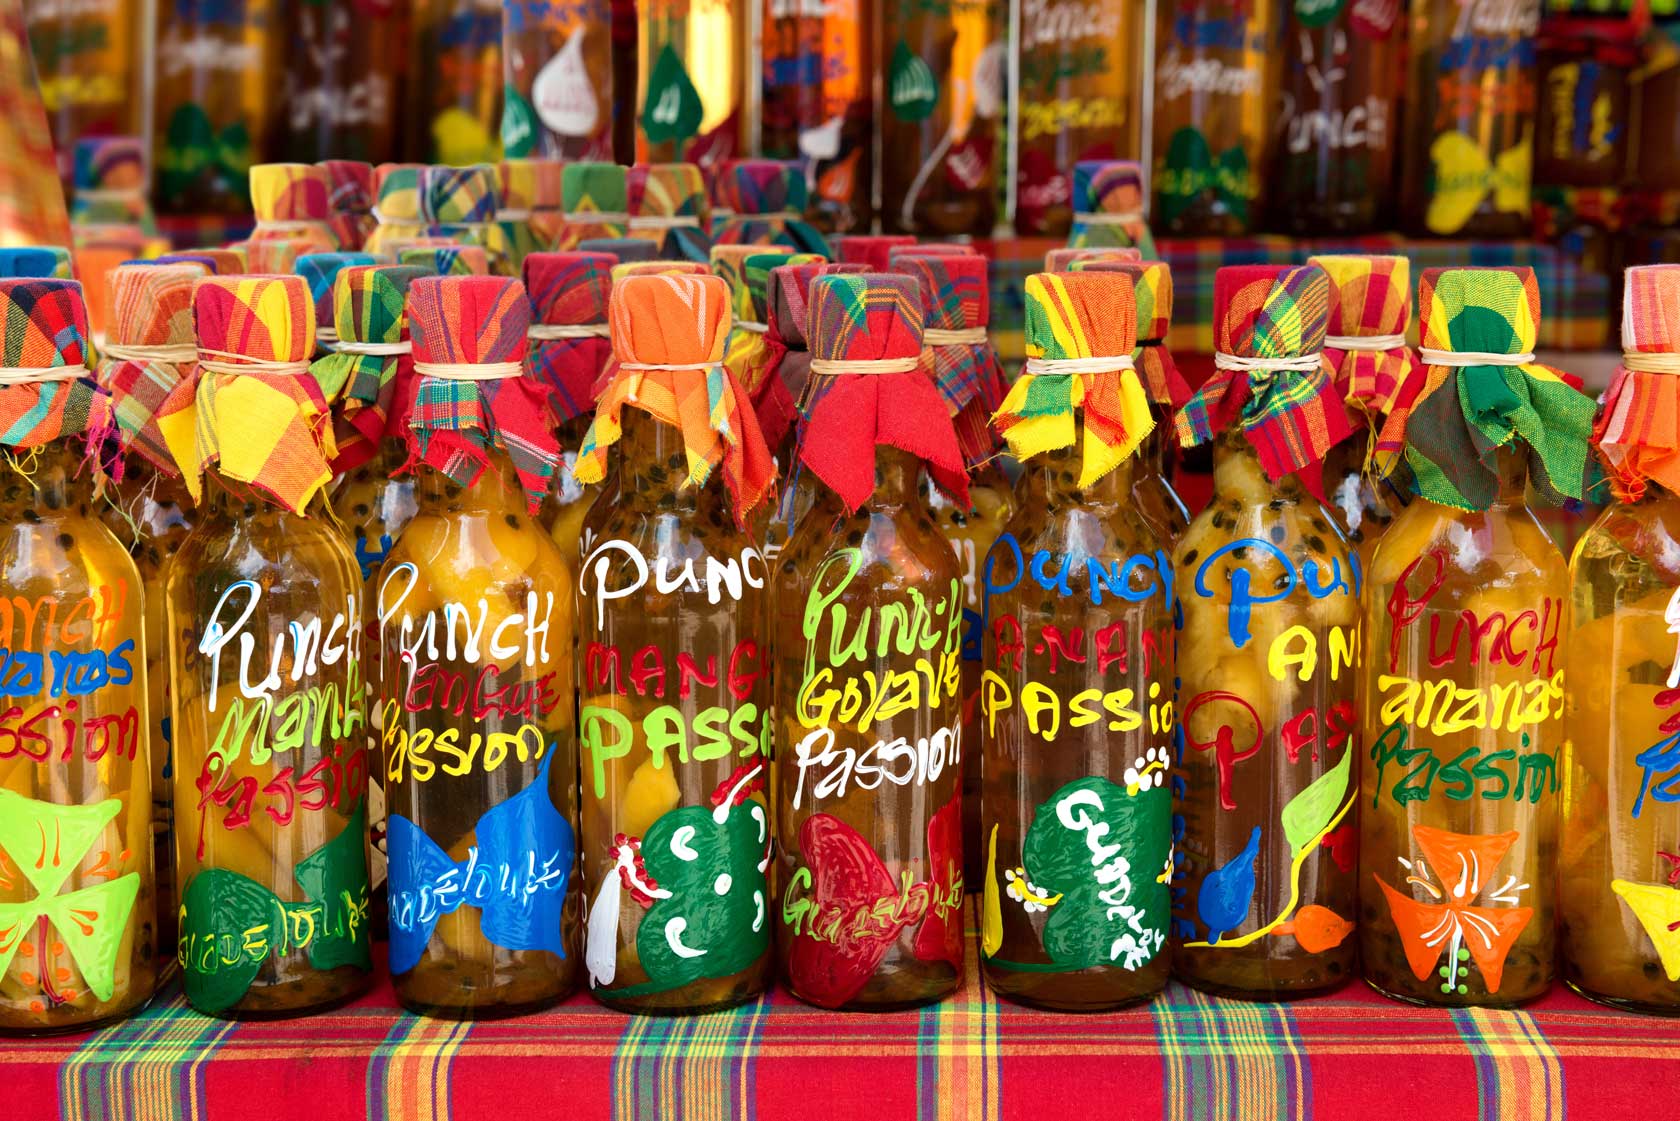 Many different colored rum bottles